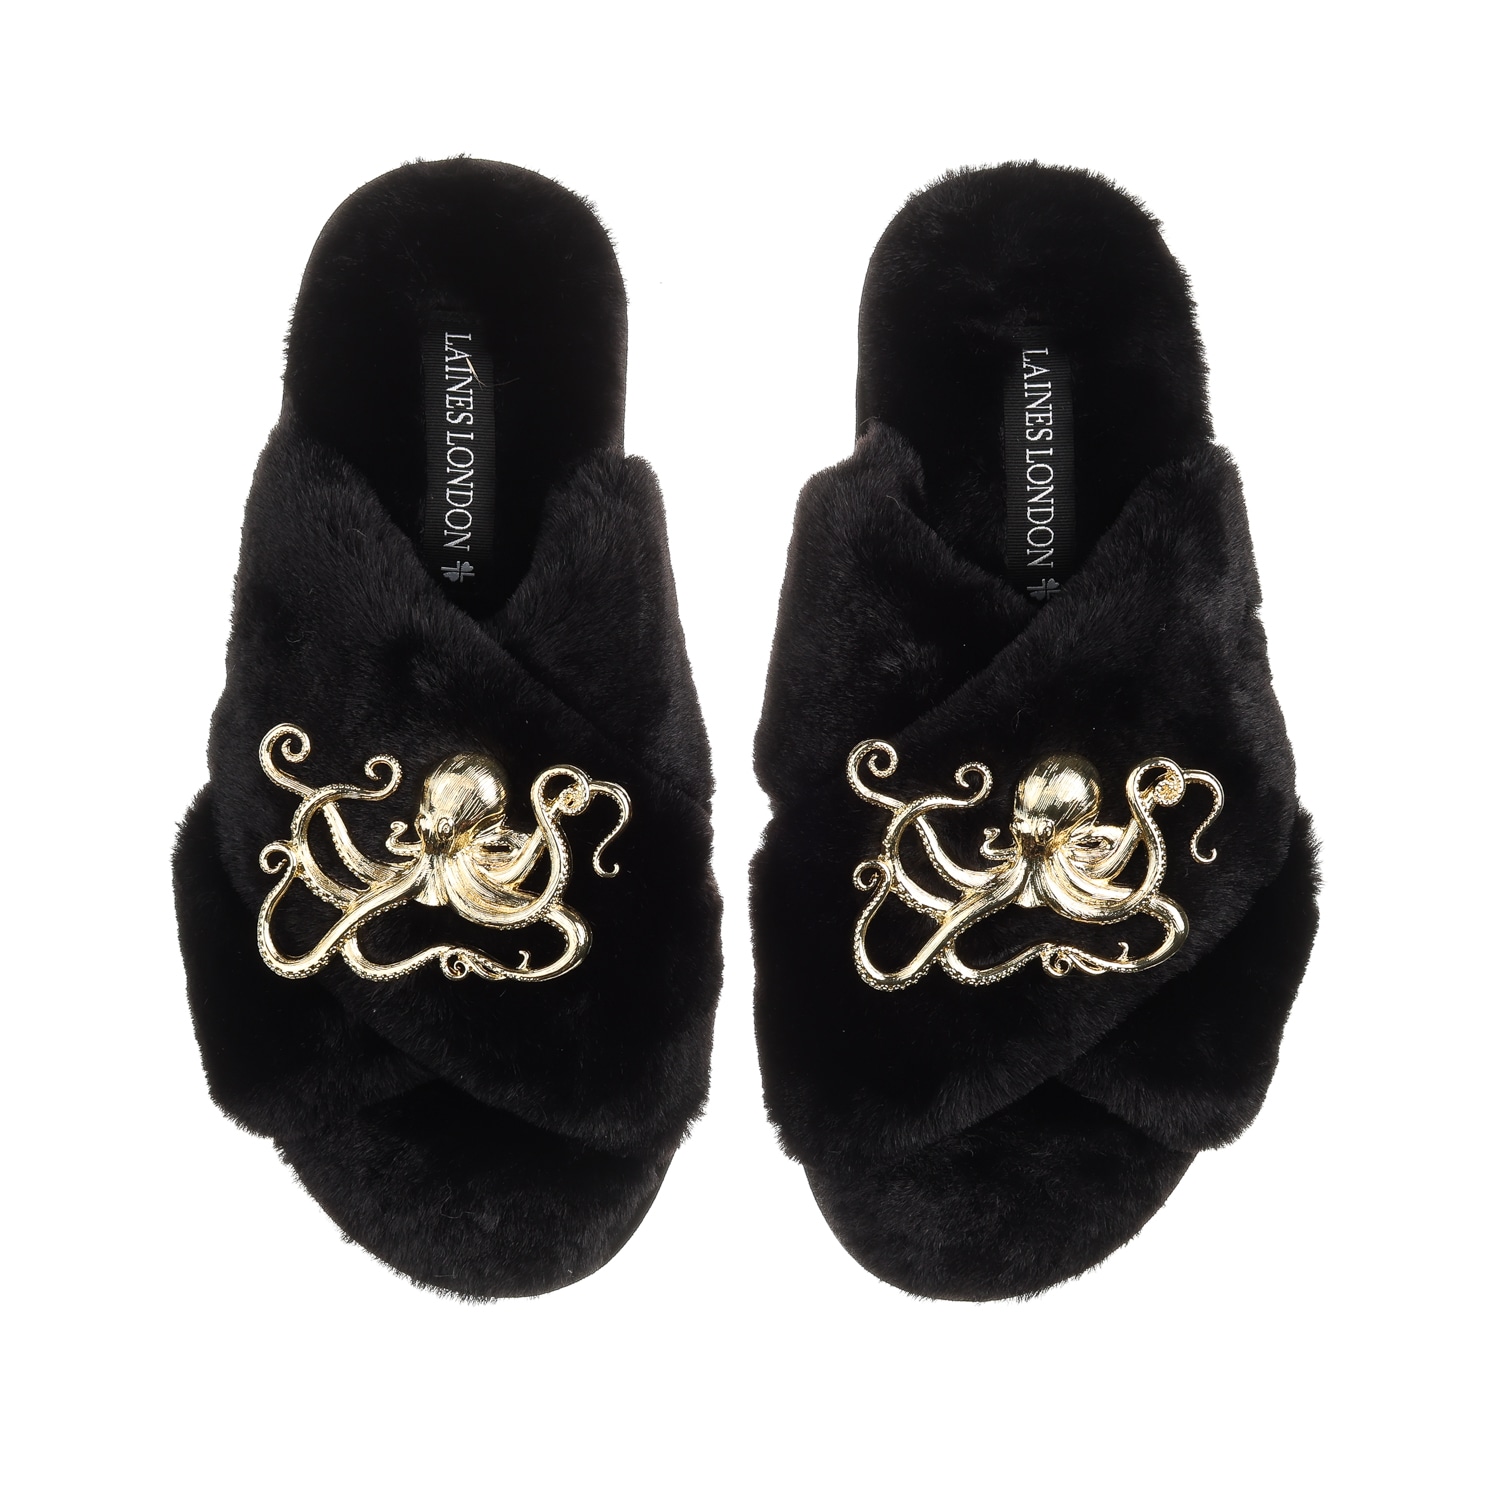 Laines London Women's Classic Laines Slippers With Gold Metal Octopus Brooches - Black